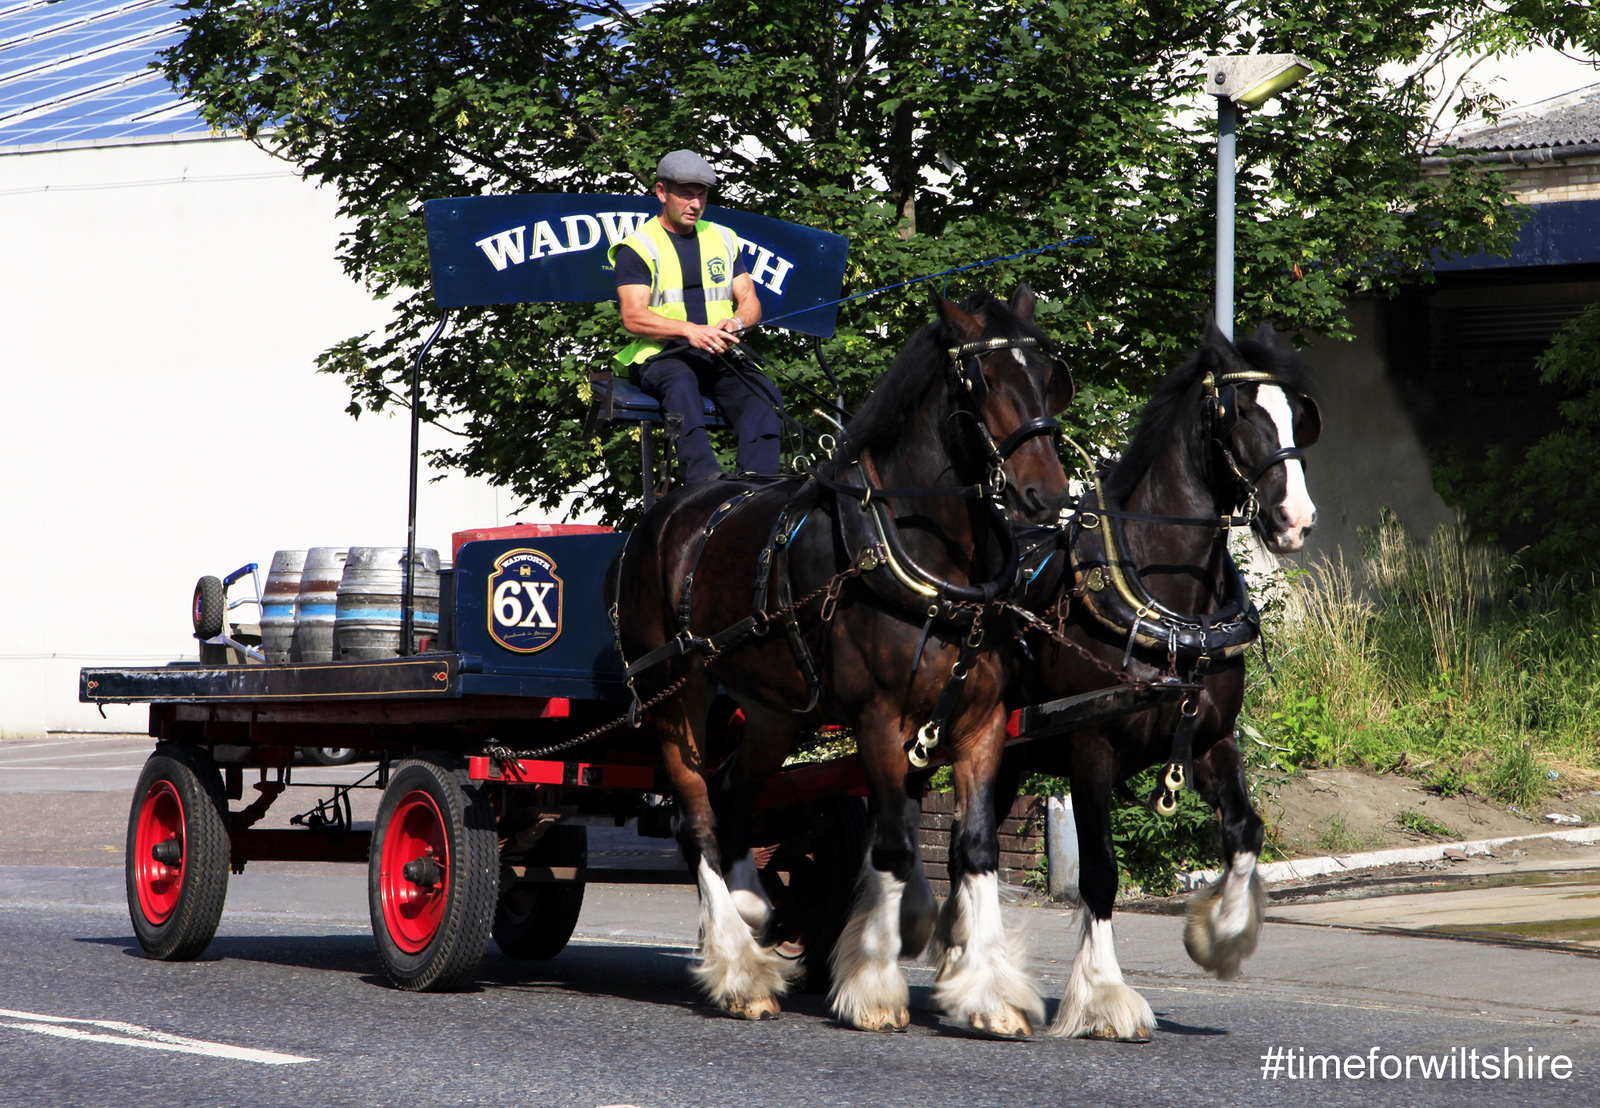 Shire horses delivery casks of ale (c)visitwiltshire.co.uk